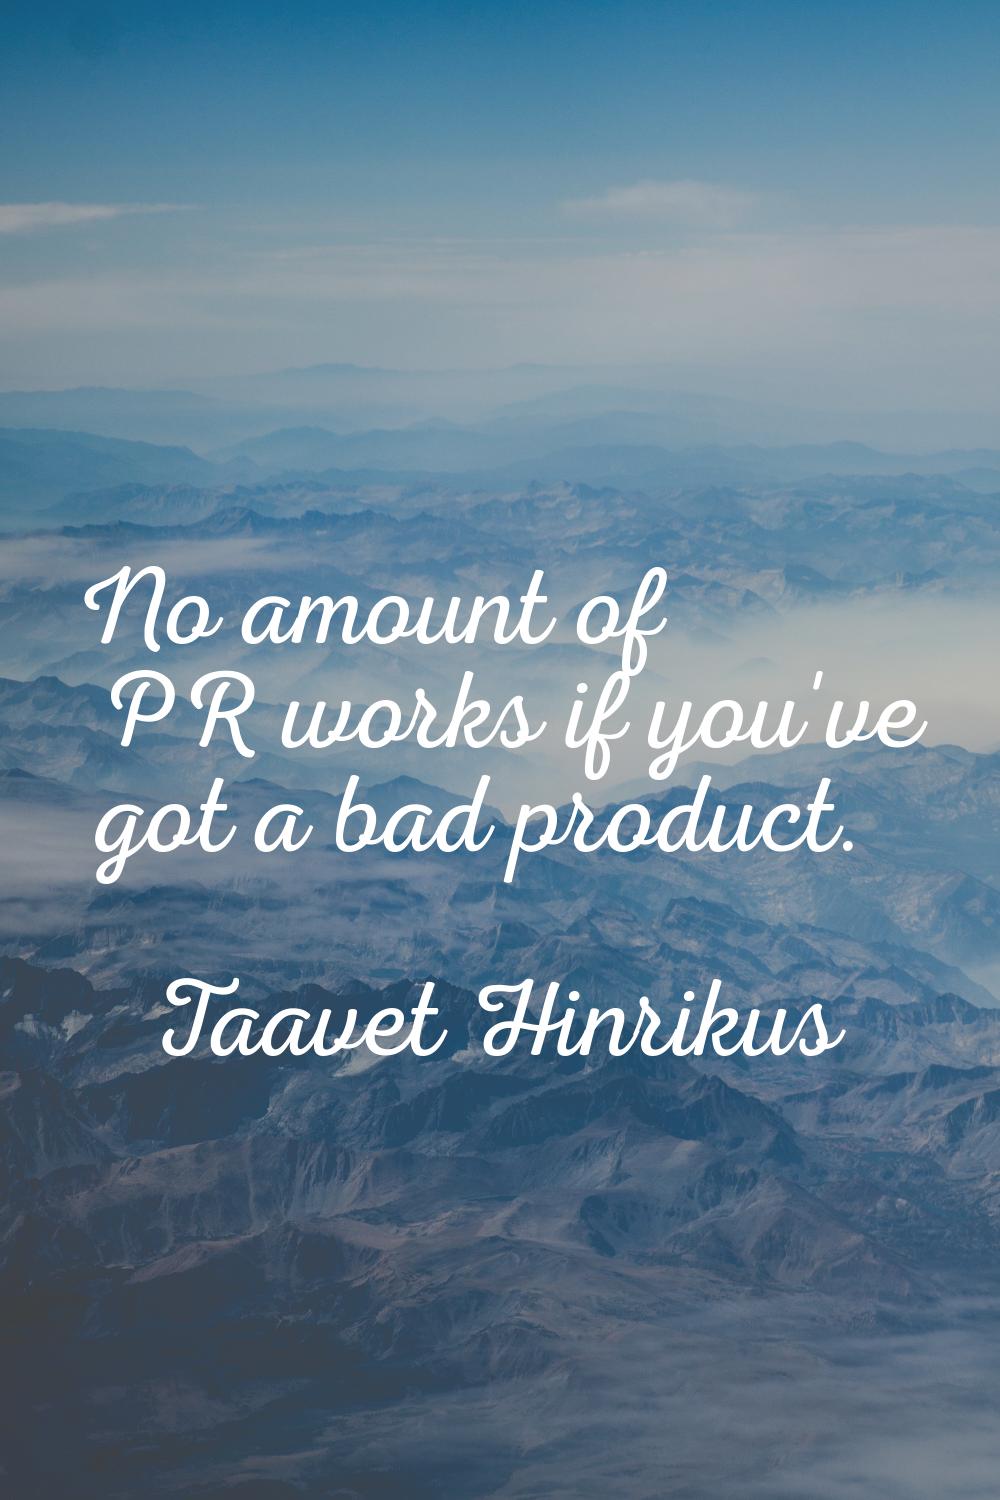 No amount of PR works if you've got a bad product.